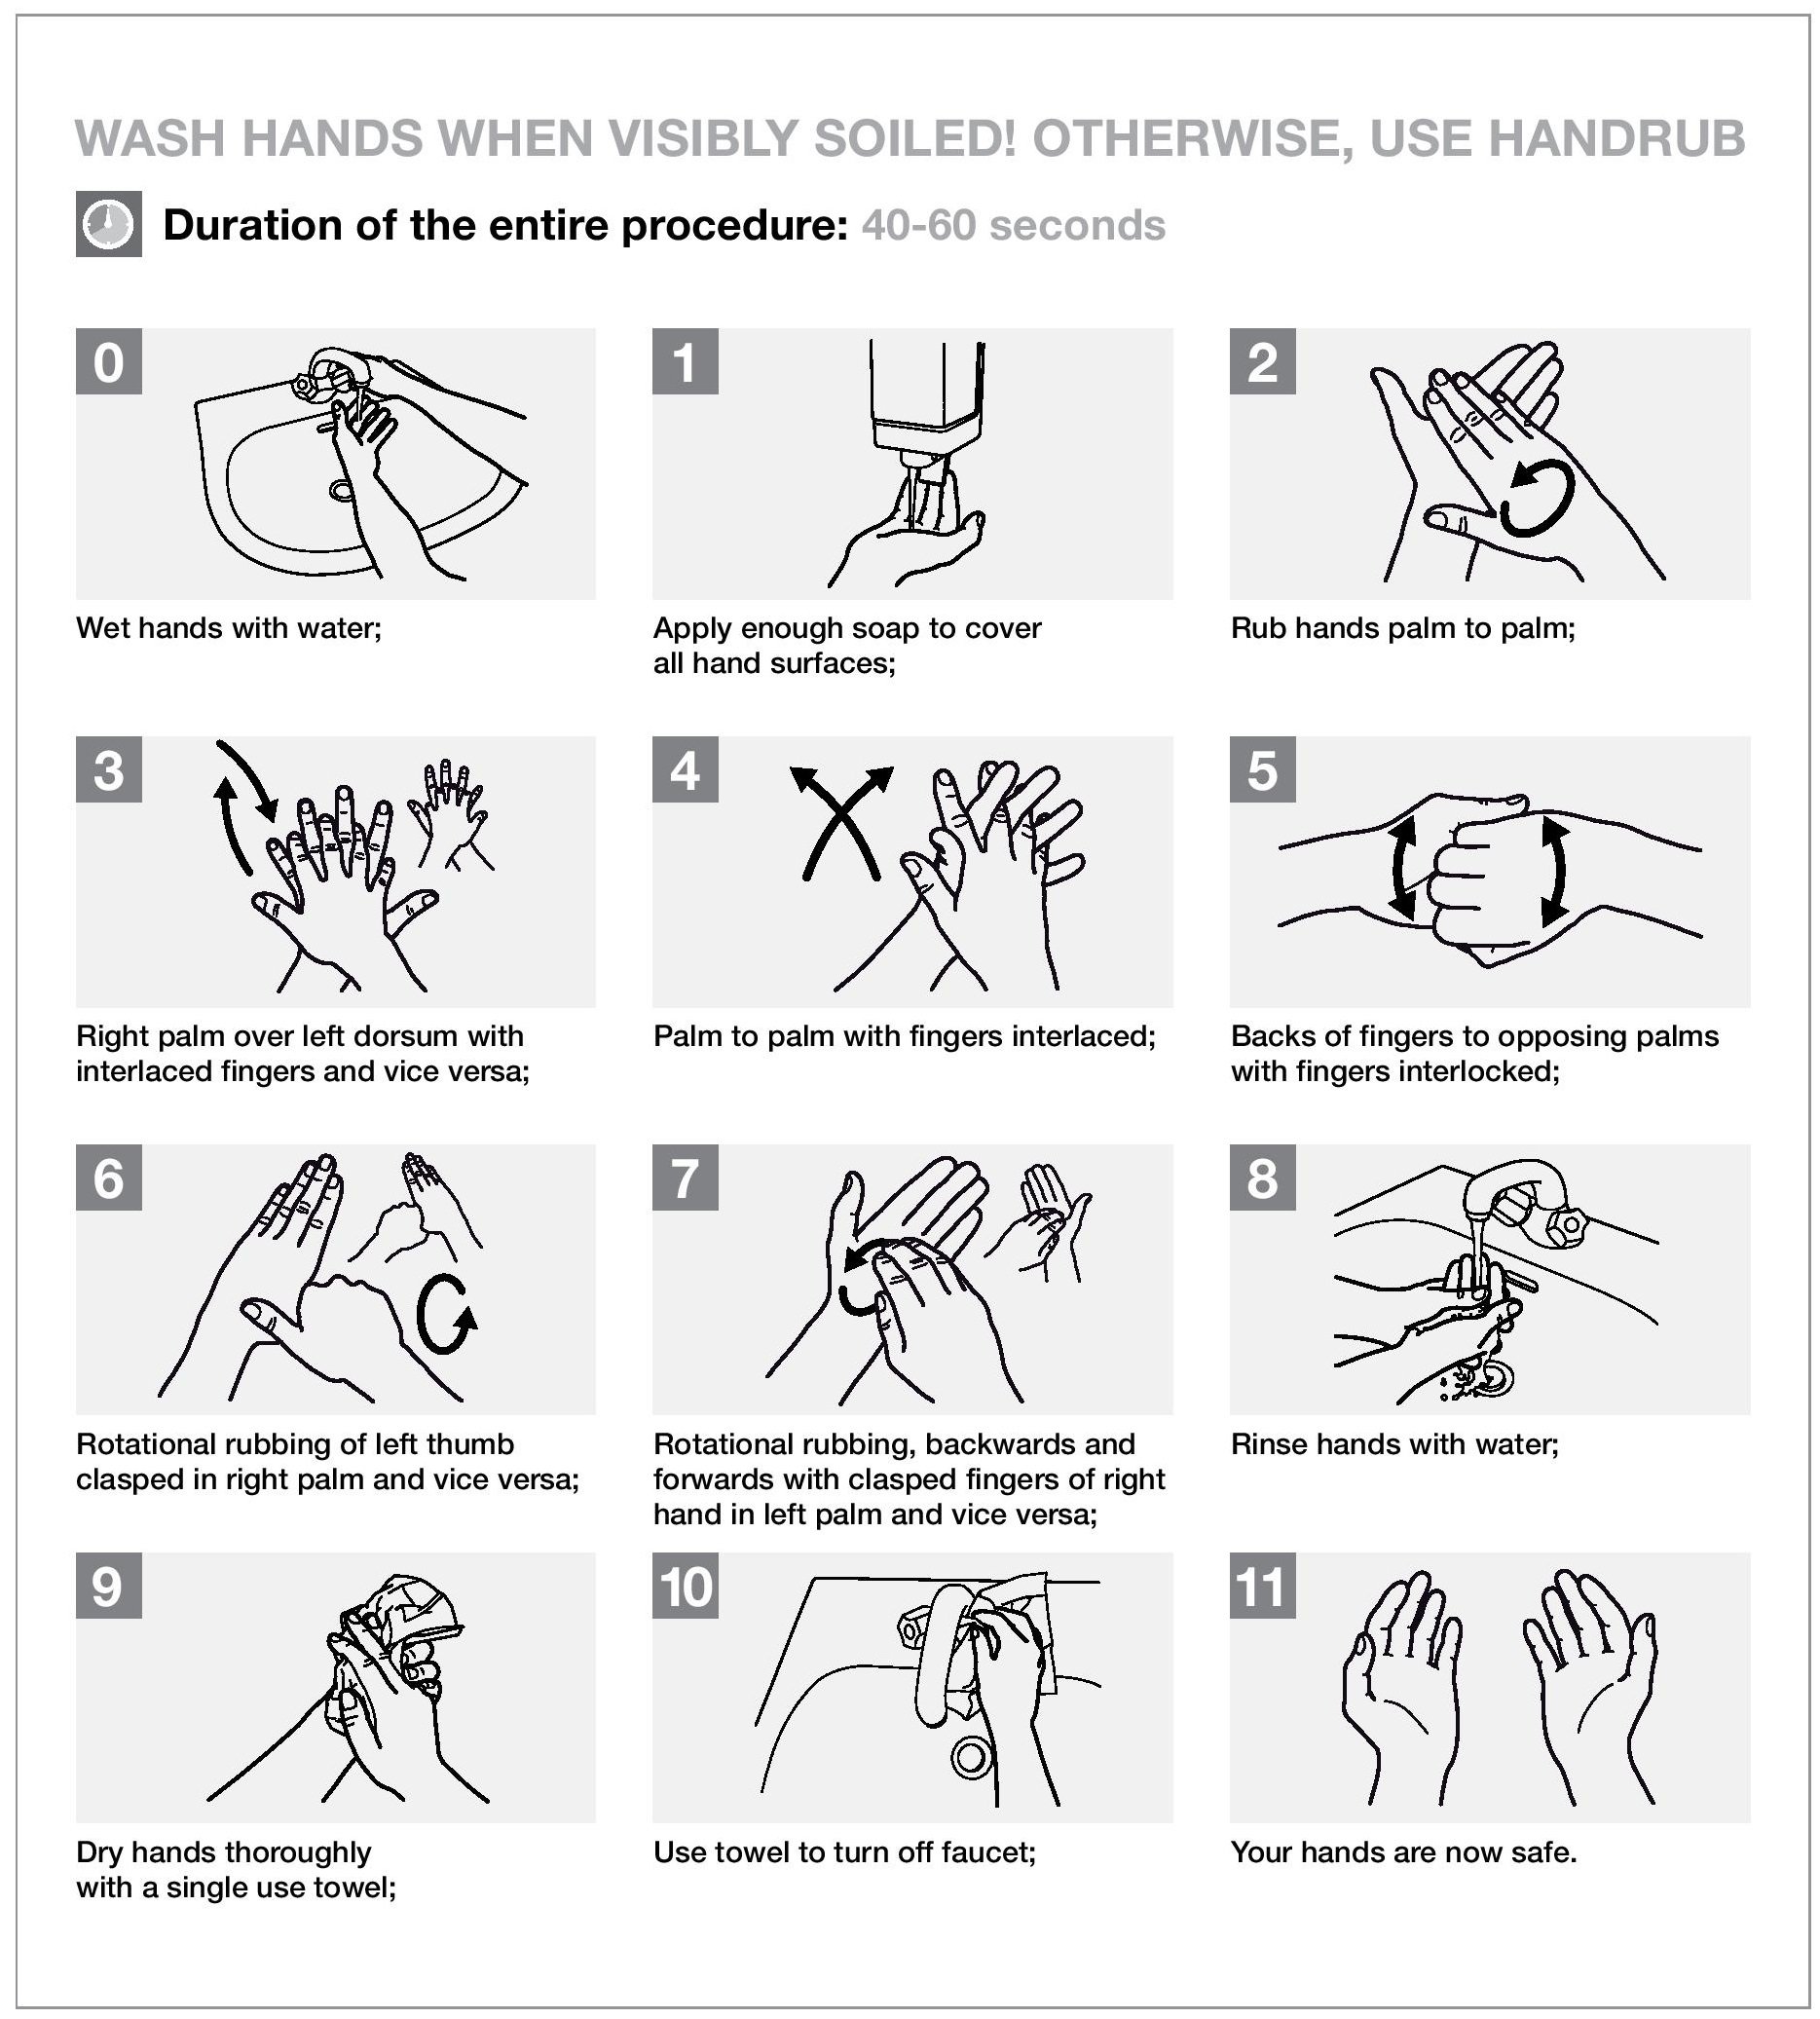 Guidelines of handwashing by the World Health Organization (WHO)